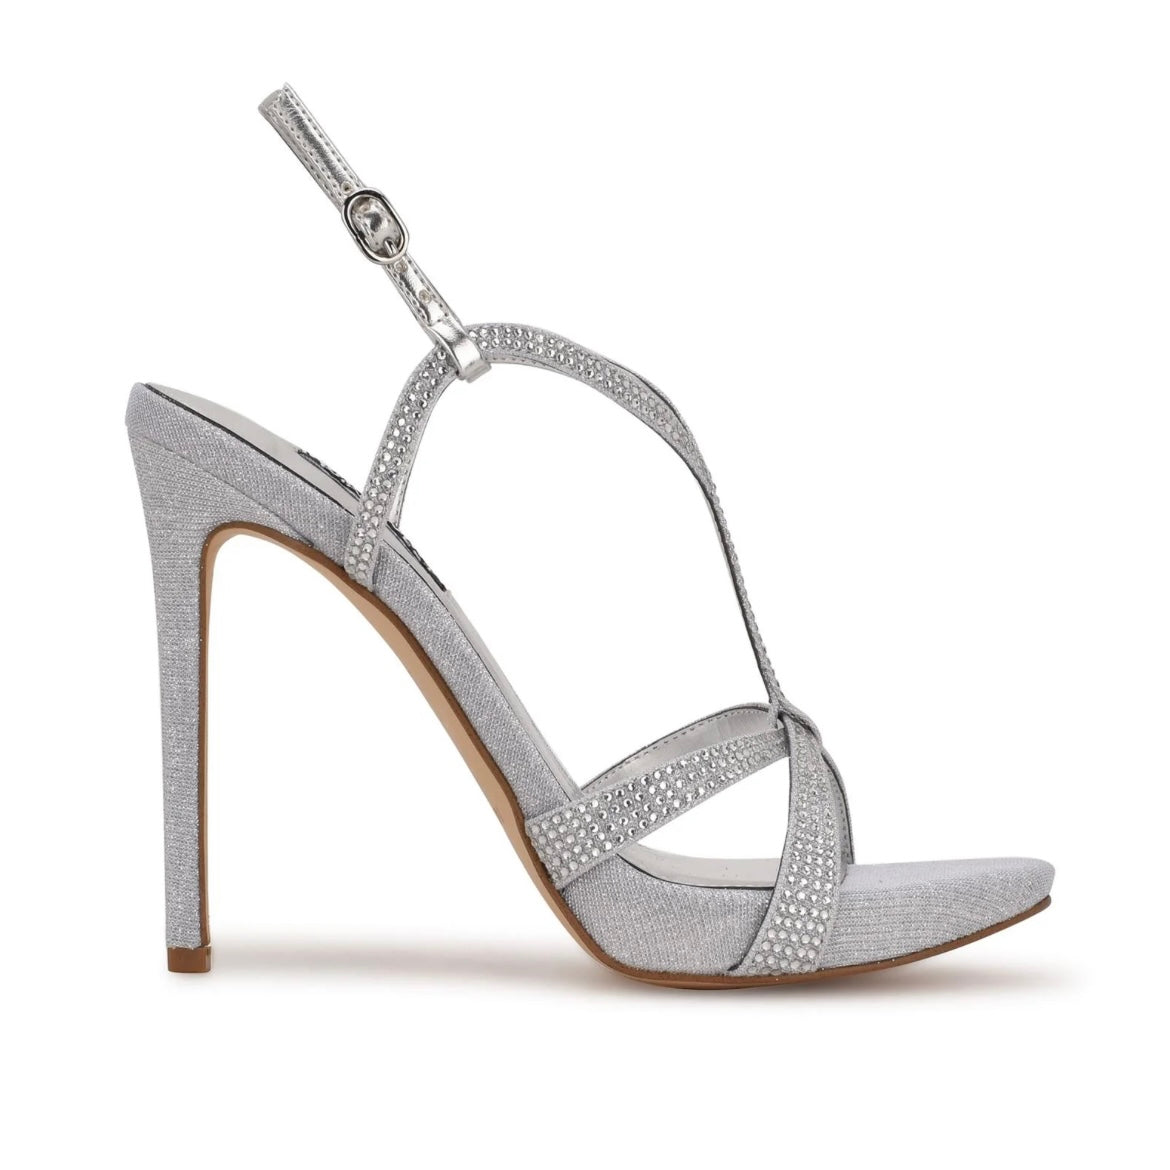 ULLIY Strappy Dress Sandals Silver Women's Shoes